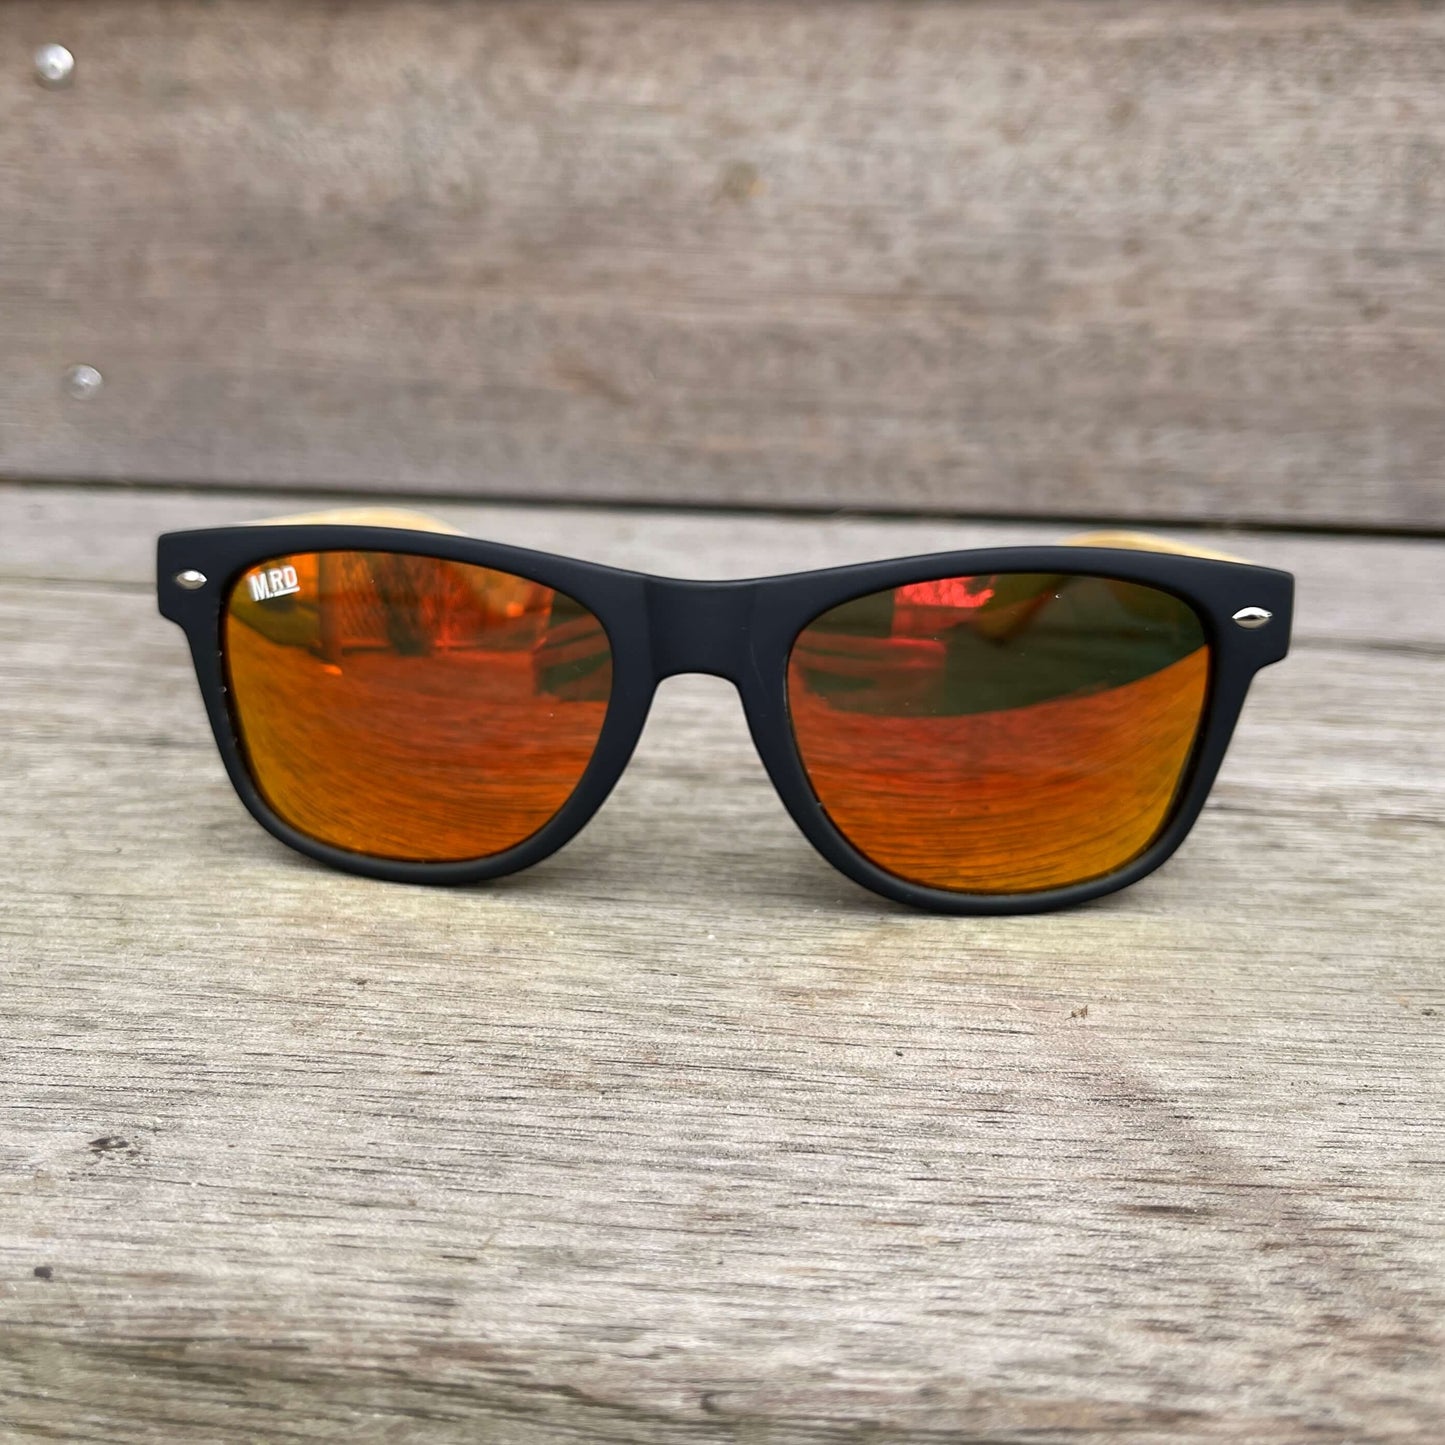 Sunglasses with wooden arms, black frames and reflective lenses.